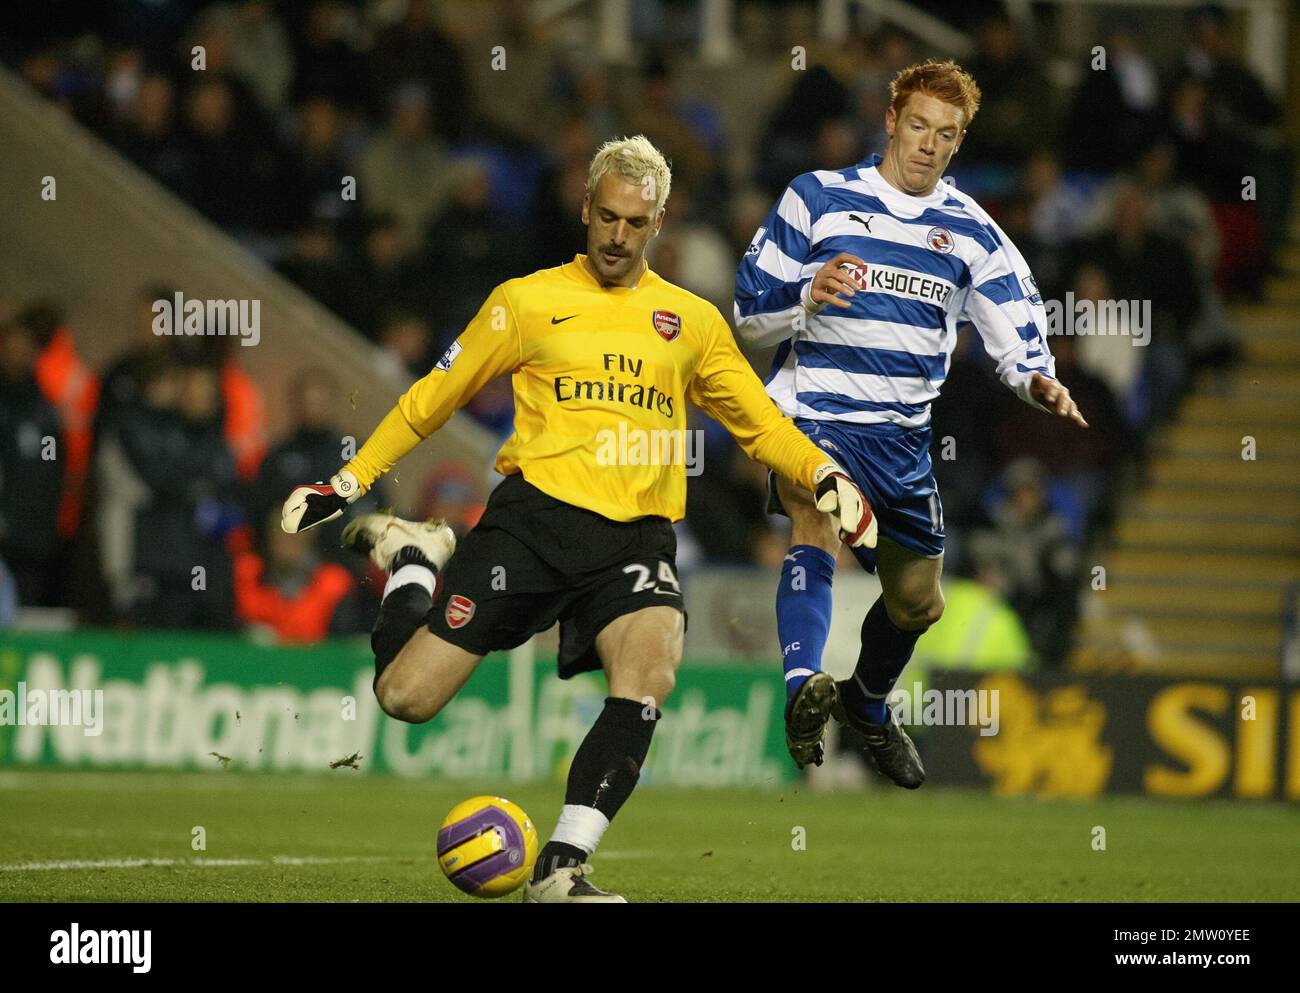 Arsenal goalkeeper Manuel Almunia challenged by Dave Kitson playing against Reading in the Premier League on 13th November 2007.This image is bound by Dataco restrictions on how it can be used. EDITORIAL USE ONLY No use with unauthorised audio, video, data, fixture lists, club/league logos or “live” services. Online in-match use limited to 120 images, no video emulation. No use in betting, games or single club/league/player publications Stock Photo